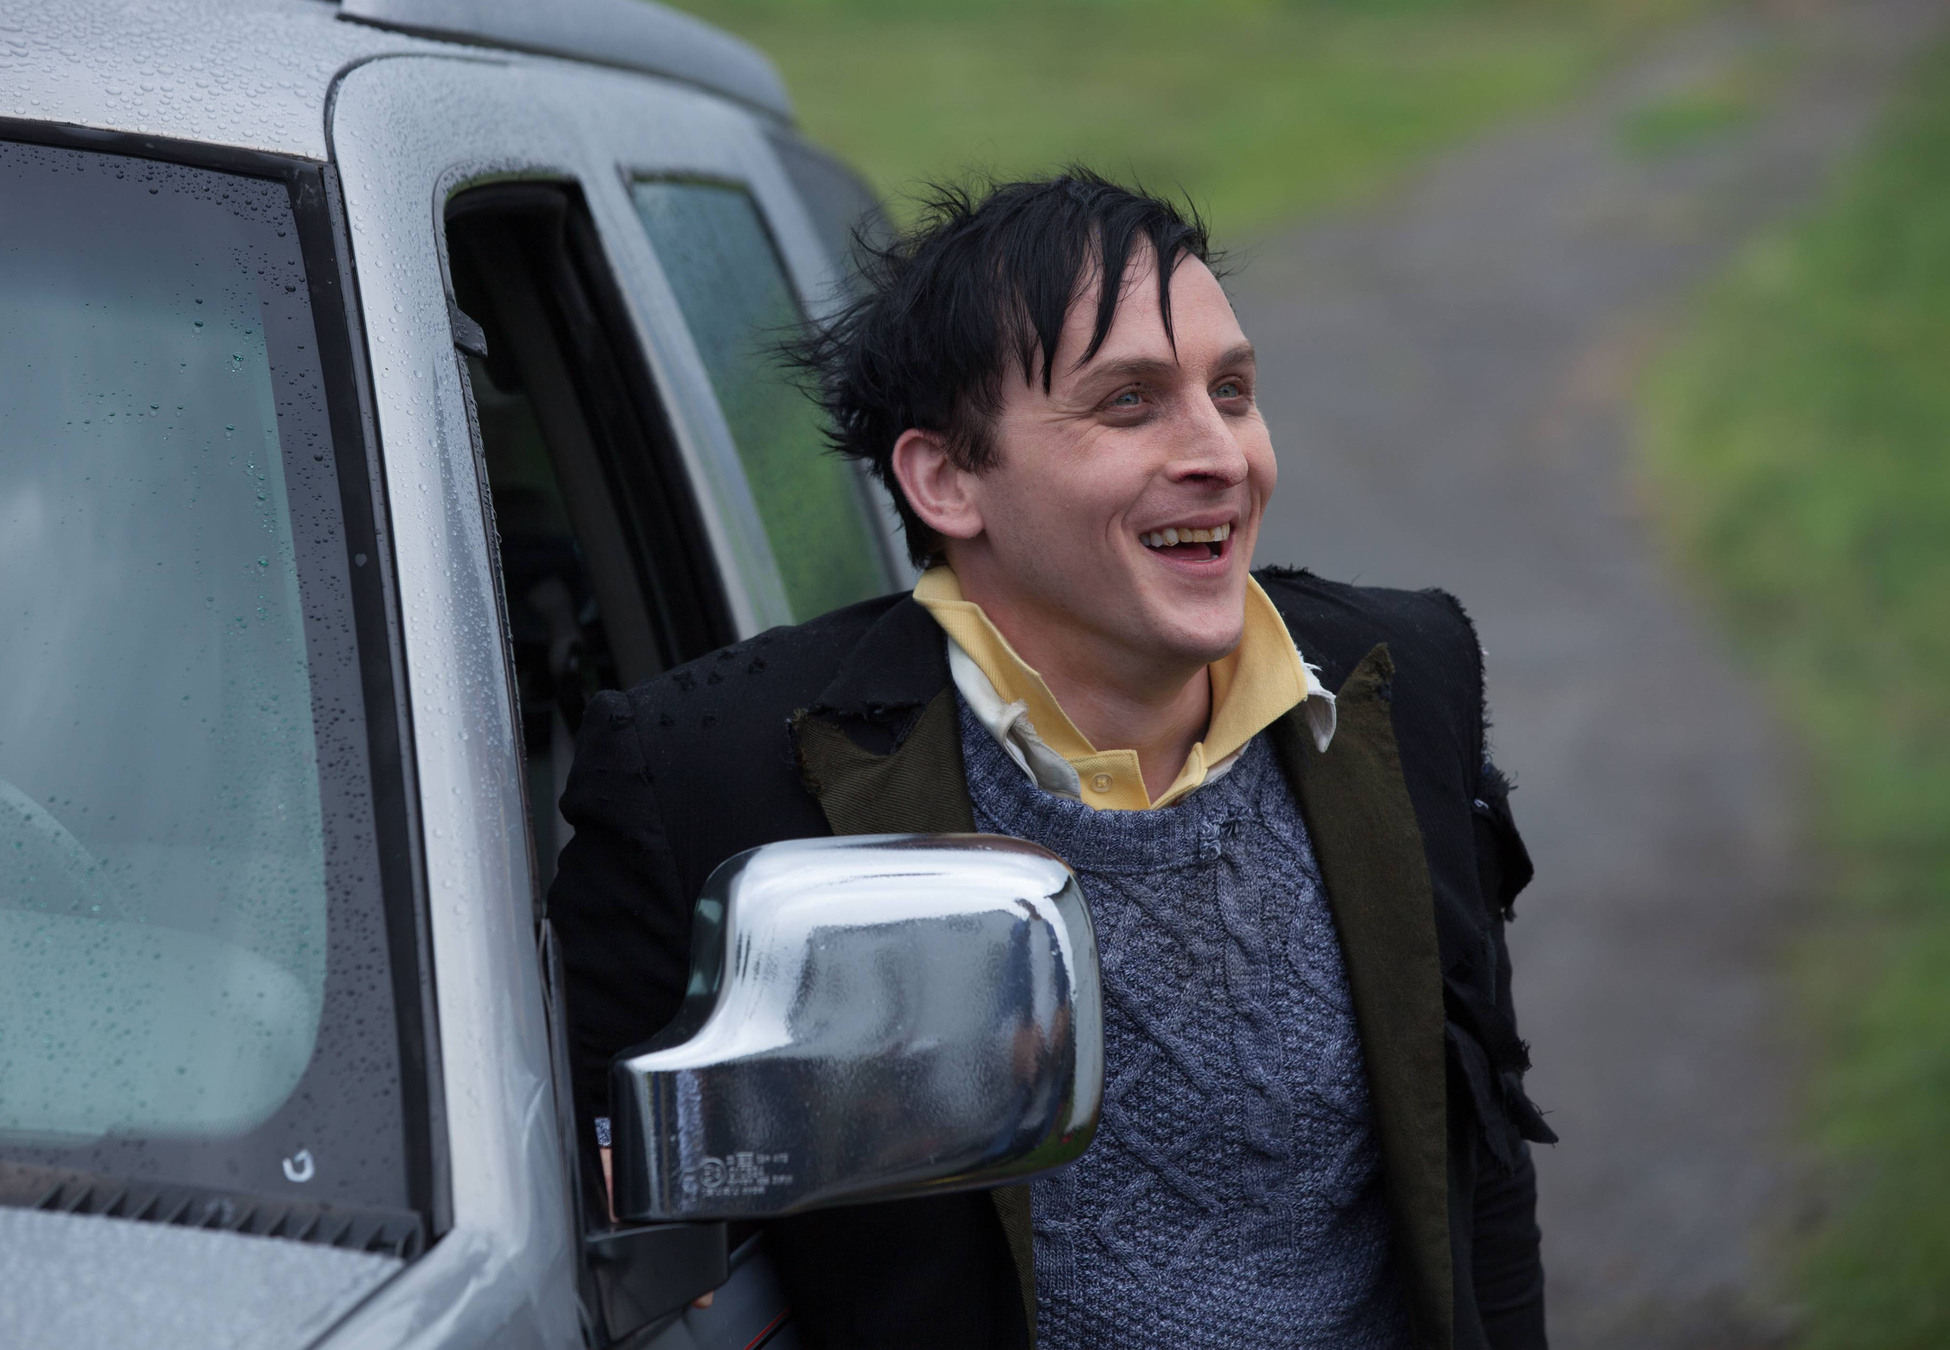 GOTHAM: Oswald Cobblepot (Robin Lord Taylor) finds temporary lodging in the "Selina Kyle" episode of GOTHAM airing Monday, Sept. 29 (8:00-9:00 PM ET/PT) on FOX. Â©2014 Fox Broadcasting Co. Cr: Jessica Miglio/FOX